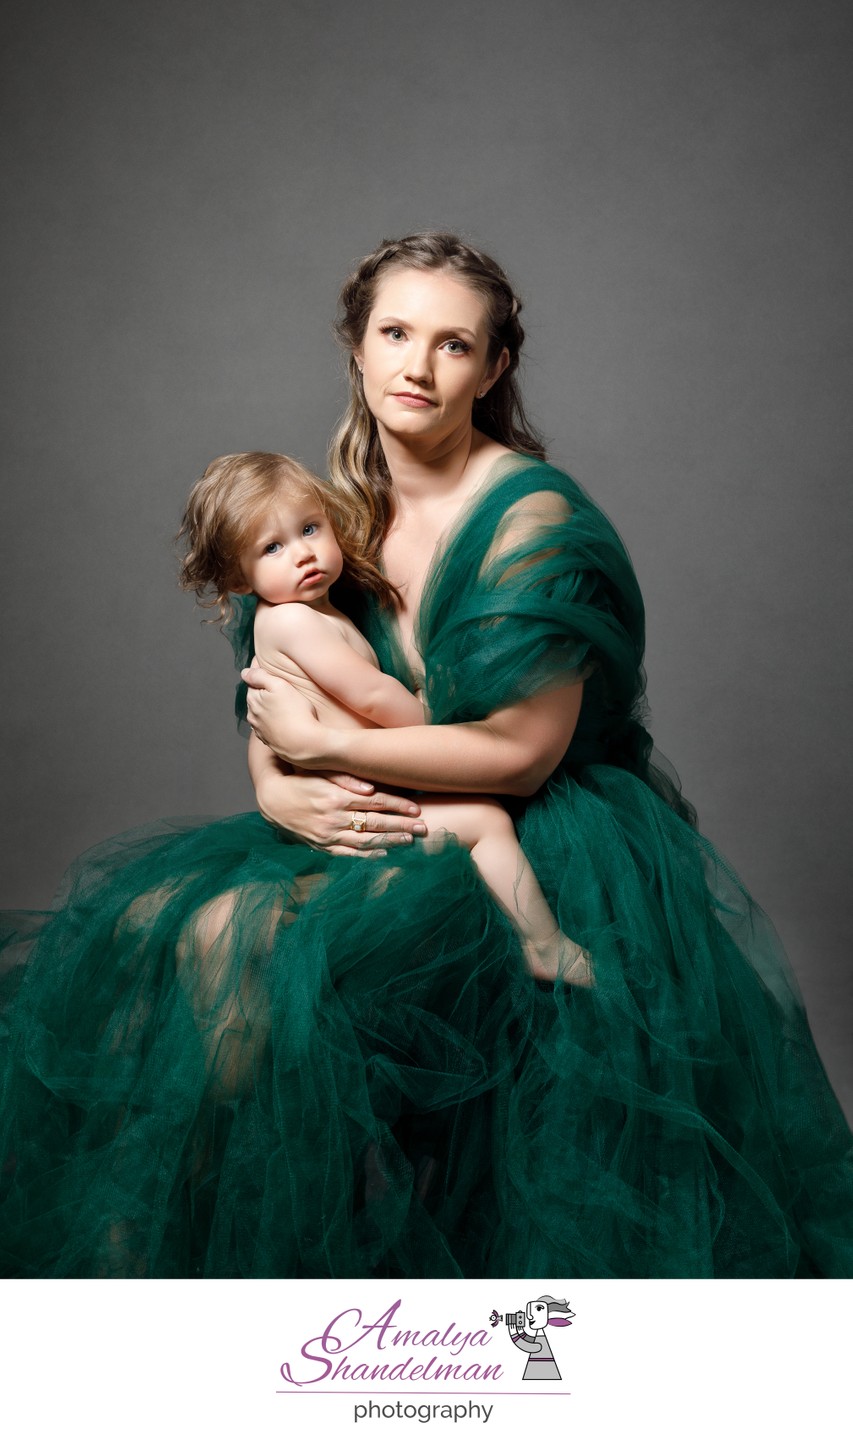 Beautiful portrait of mom and child